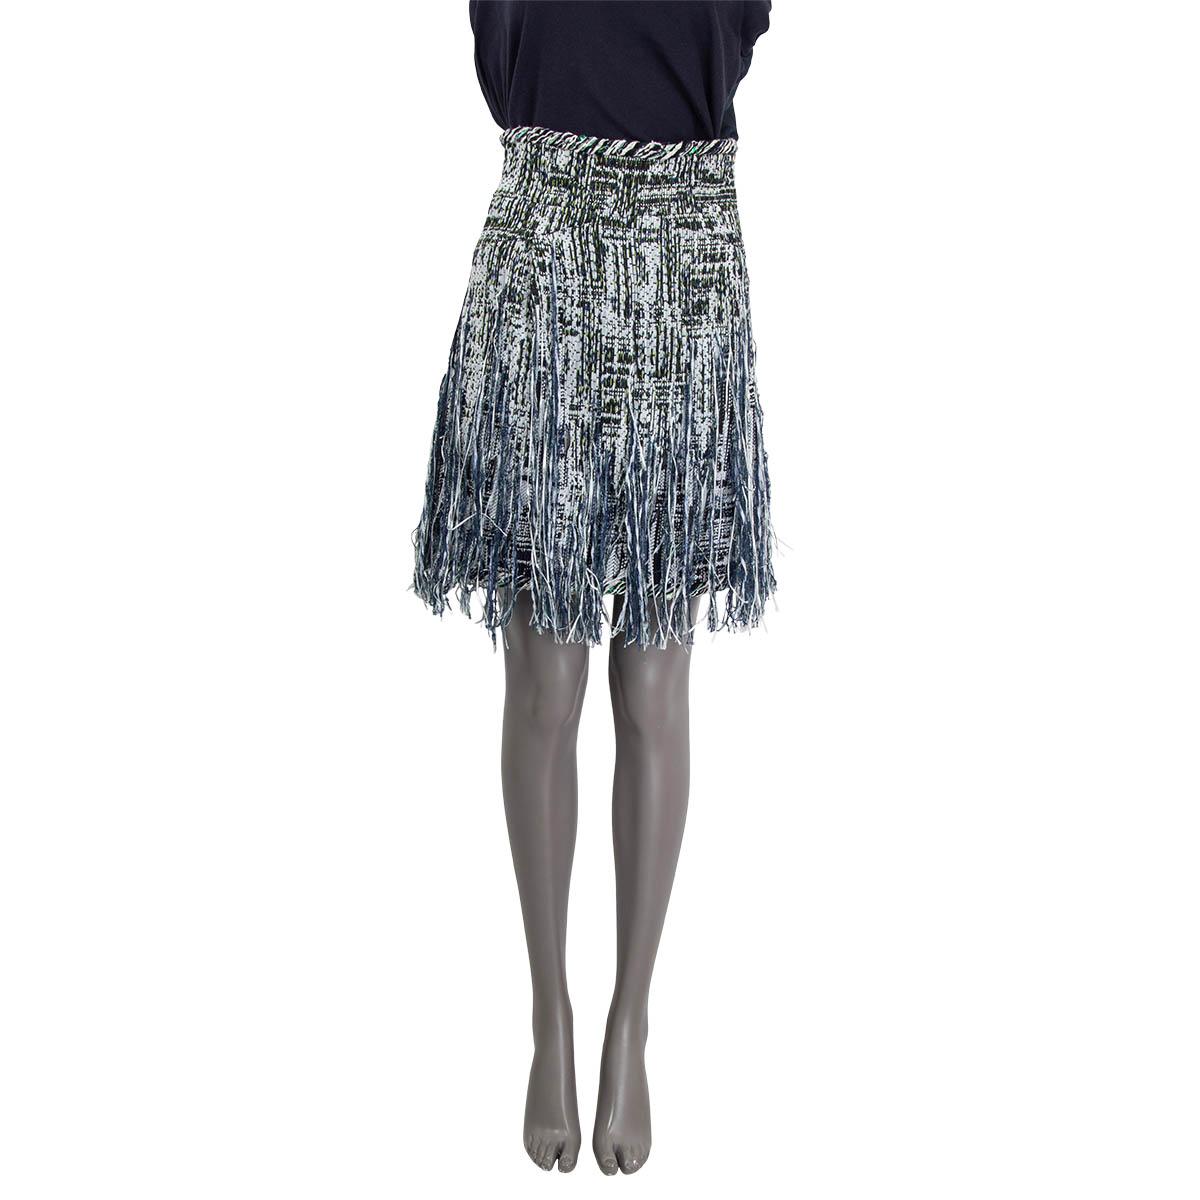 100% authentic Chanel high waisted fringed mini skirt from Spring 2018 in green, blue, white and navy cotton (34%), polyamide (32%), acrylic (24%), viscose (6%), polyester (3%) nd metal polyester (1%). Has silver lurex fringes all over and is